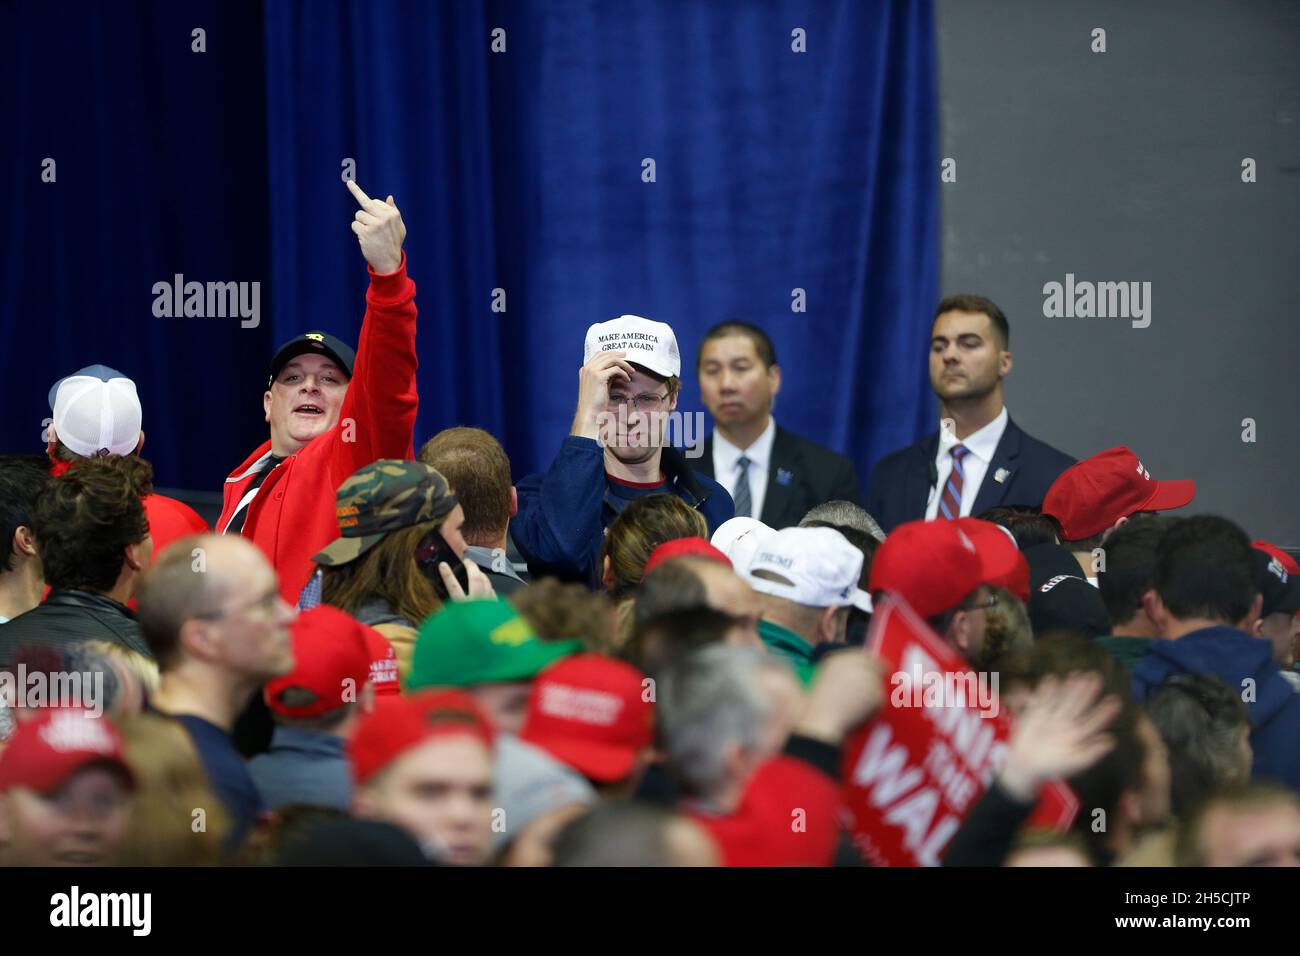 11052018 - Fort Wayne, Indiana, USA: Trump supporters flip off CNN reporter Jim Acosta before United States President Donald J. Trump campaigns for Indiana congressional candidates, including Mike Braun, who is running for senate, during a Make America Great Again! rally at the Allen County War Memorial Coliseum in Fort Wayne, Indiana. Stock Photo